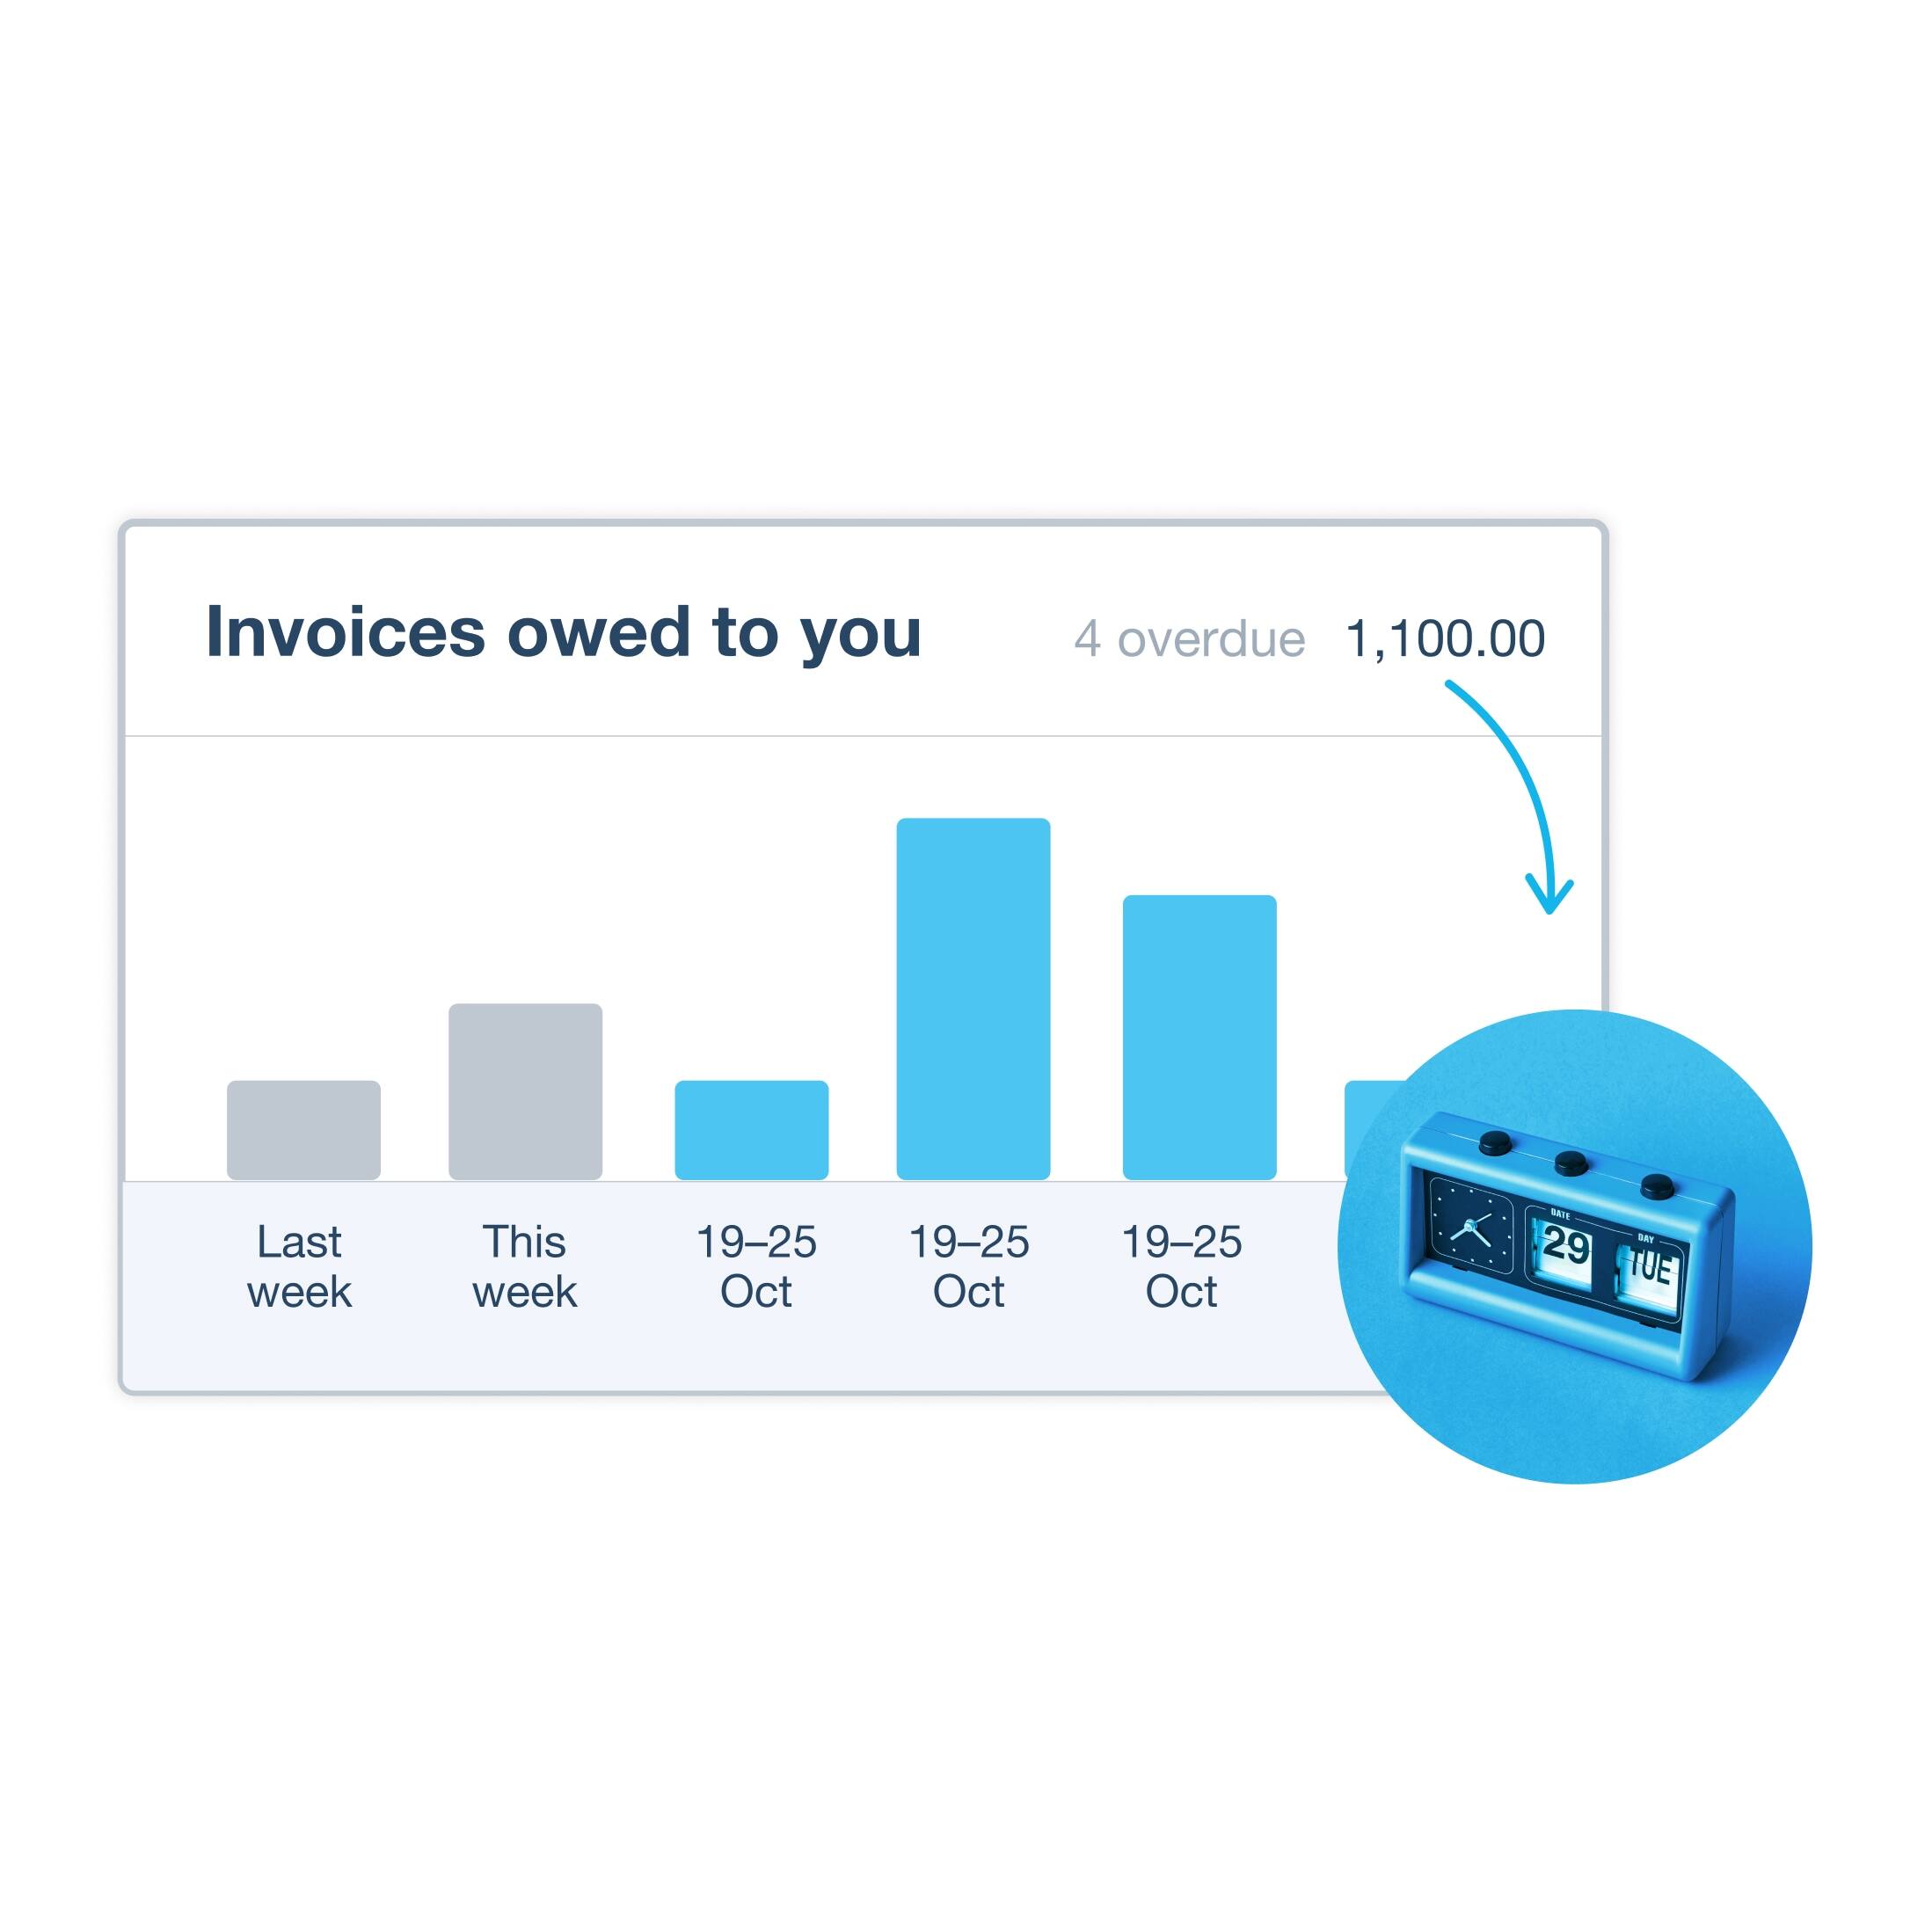 The Xero dashboard shows a bar chart of invoices owed to a business.